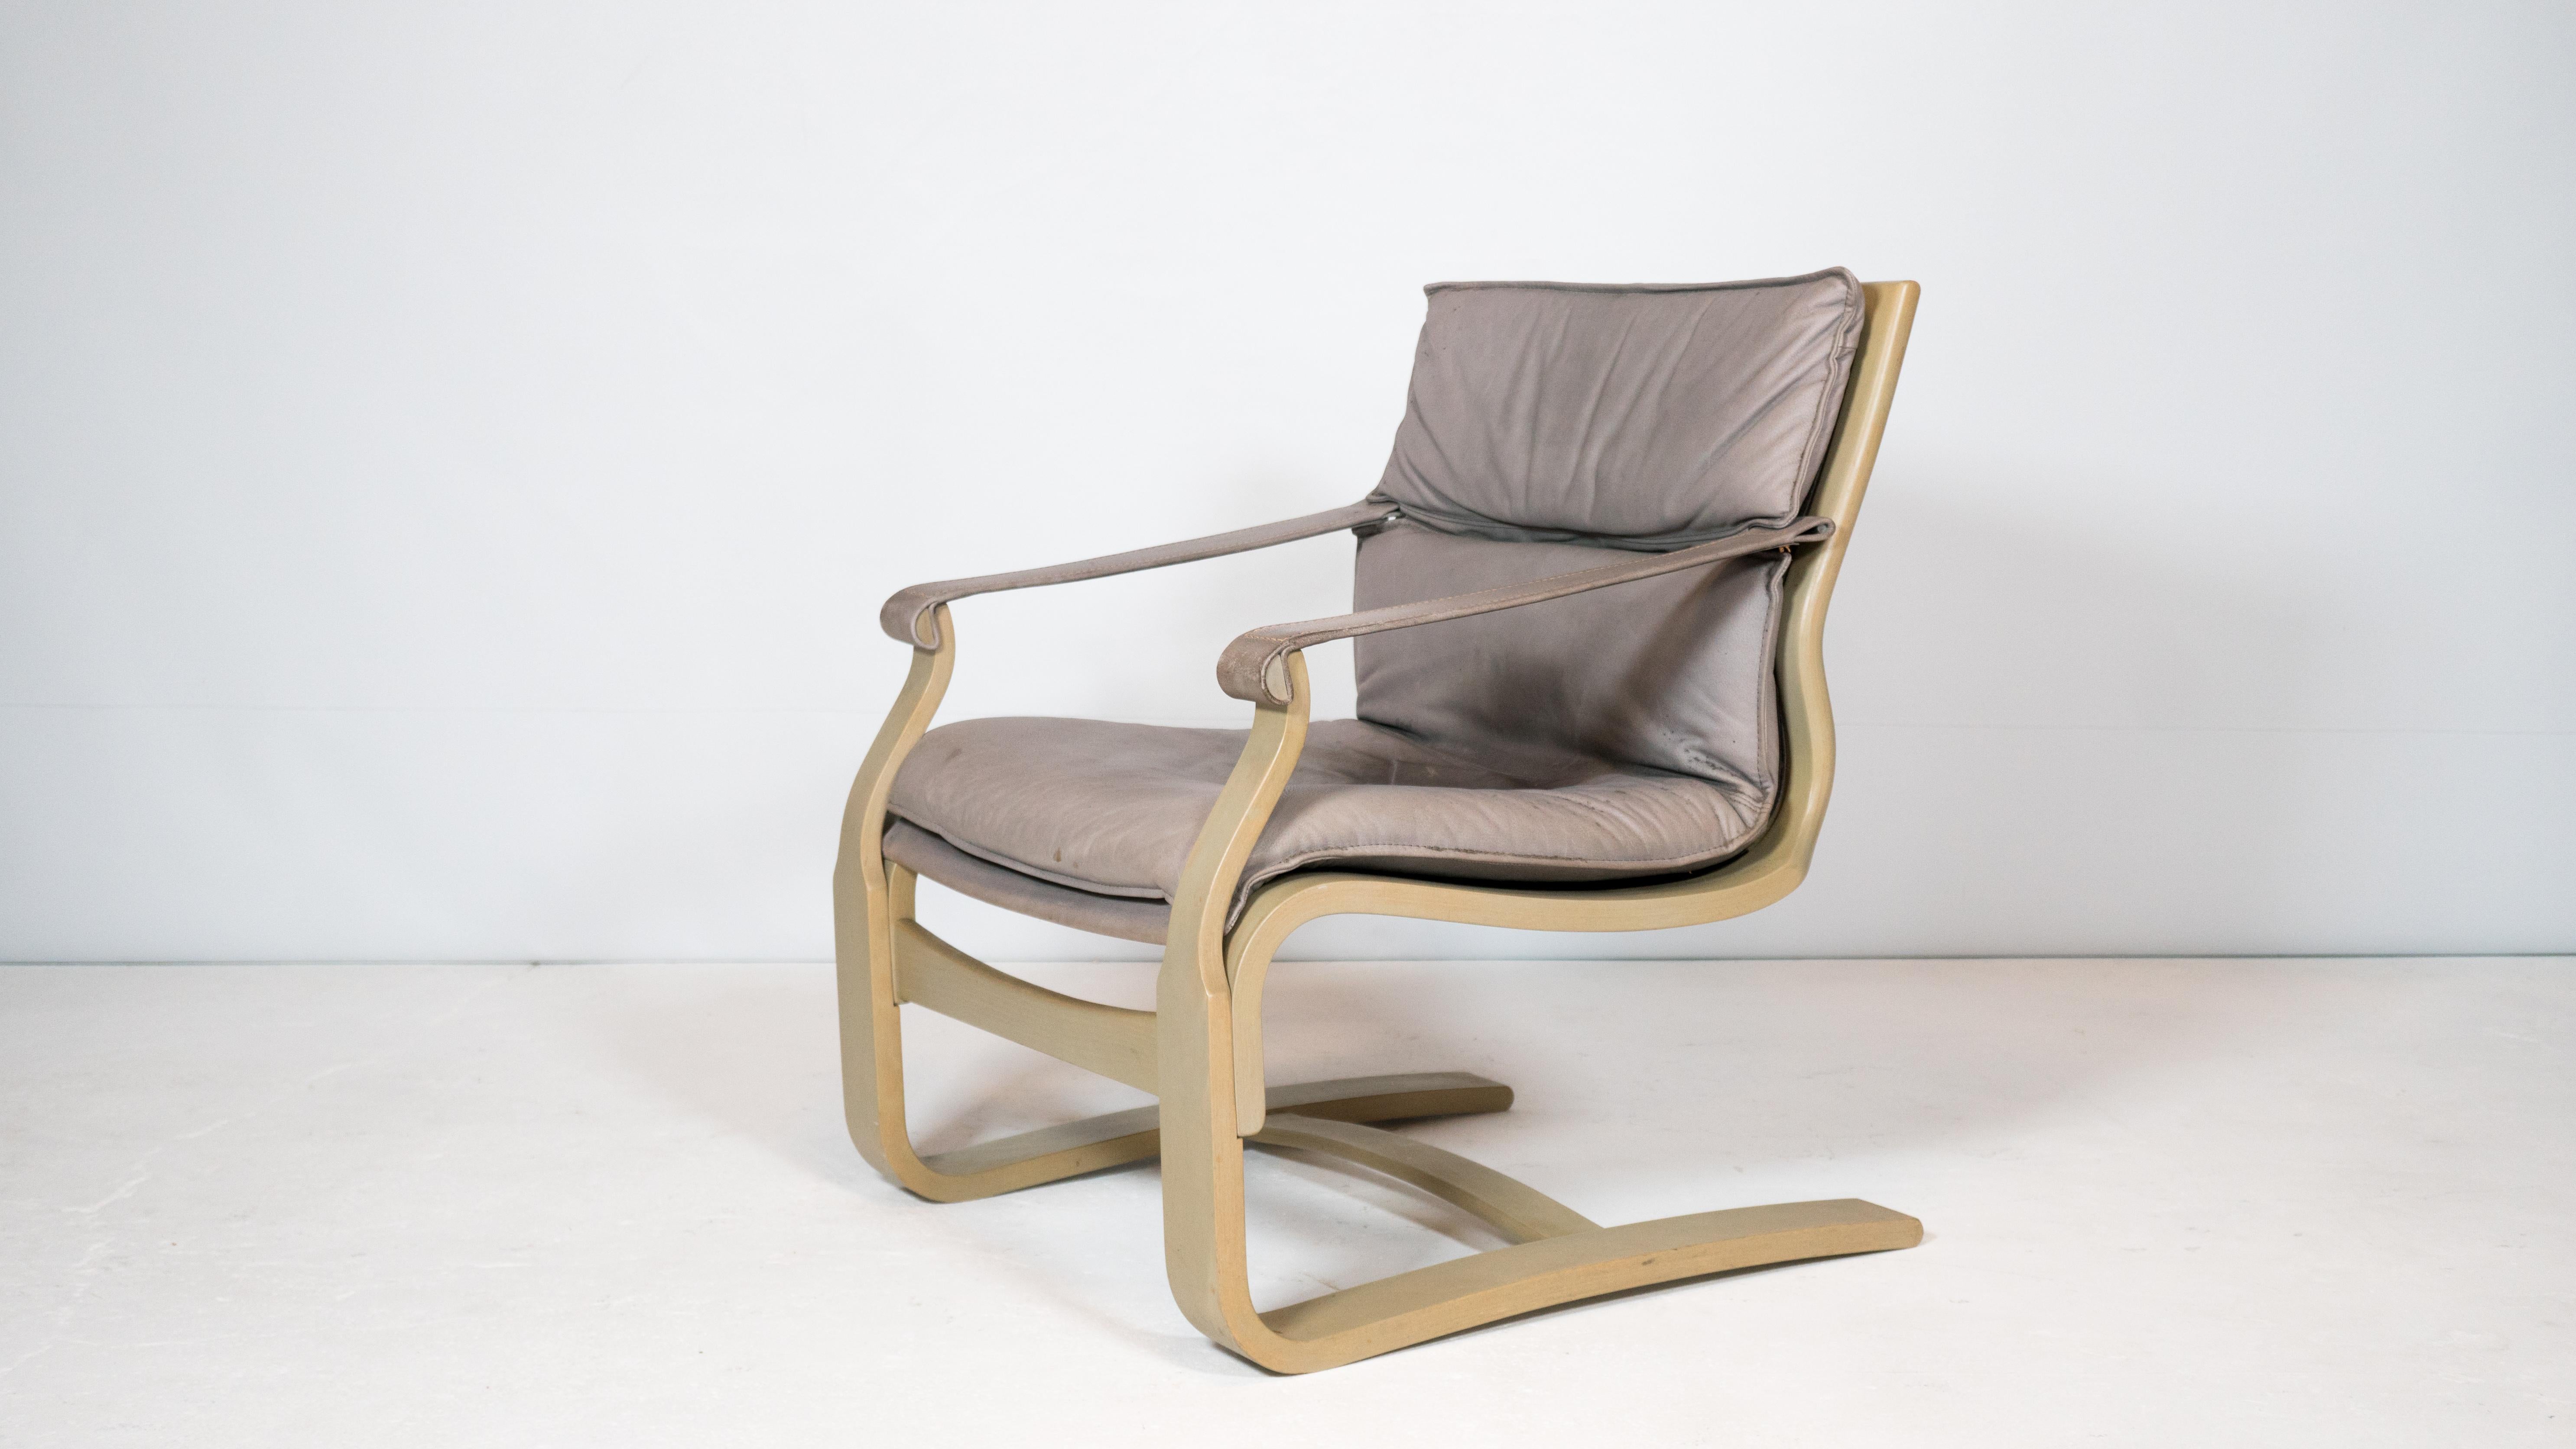 Ake Fribytter Lounge Chair for Nelo Möbel of Sweden, circa 1970s. Sculpted bentwood frame that offers some flex, creating a pleasant bounce when seating. Gray padded leather cushion (removable) and armrests. Good vintage condition. Made in Sweden.